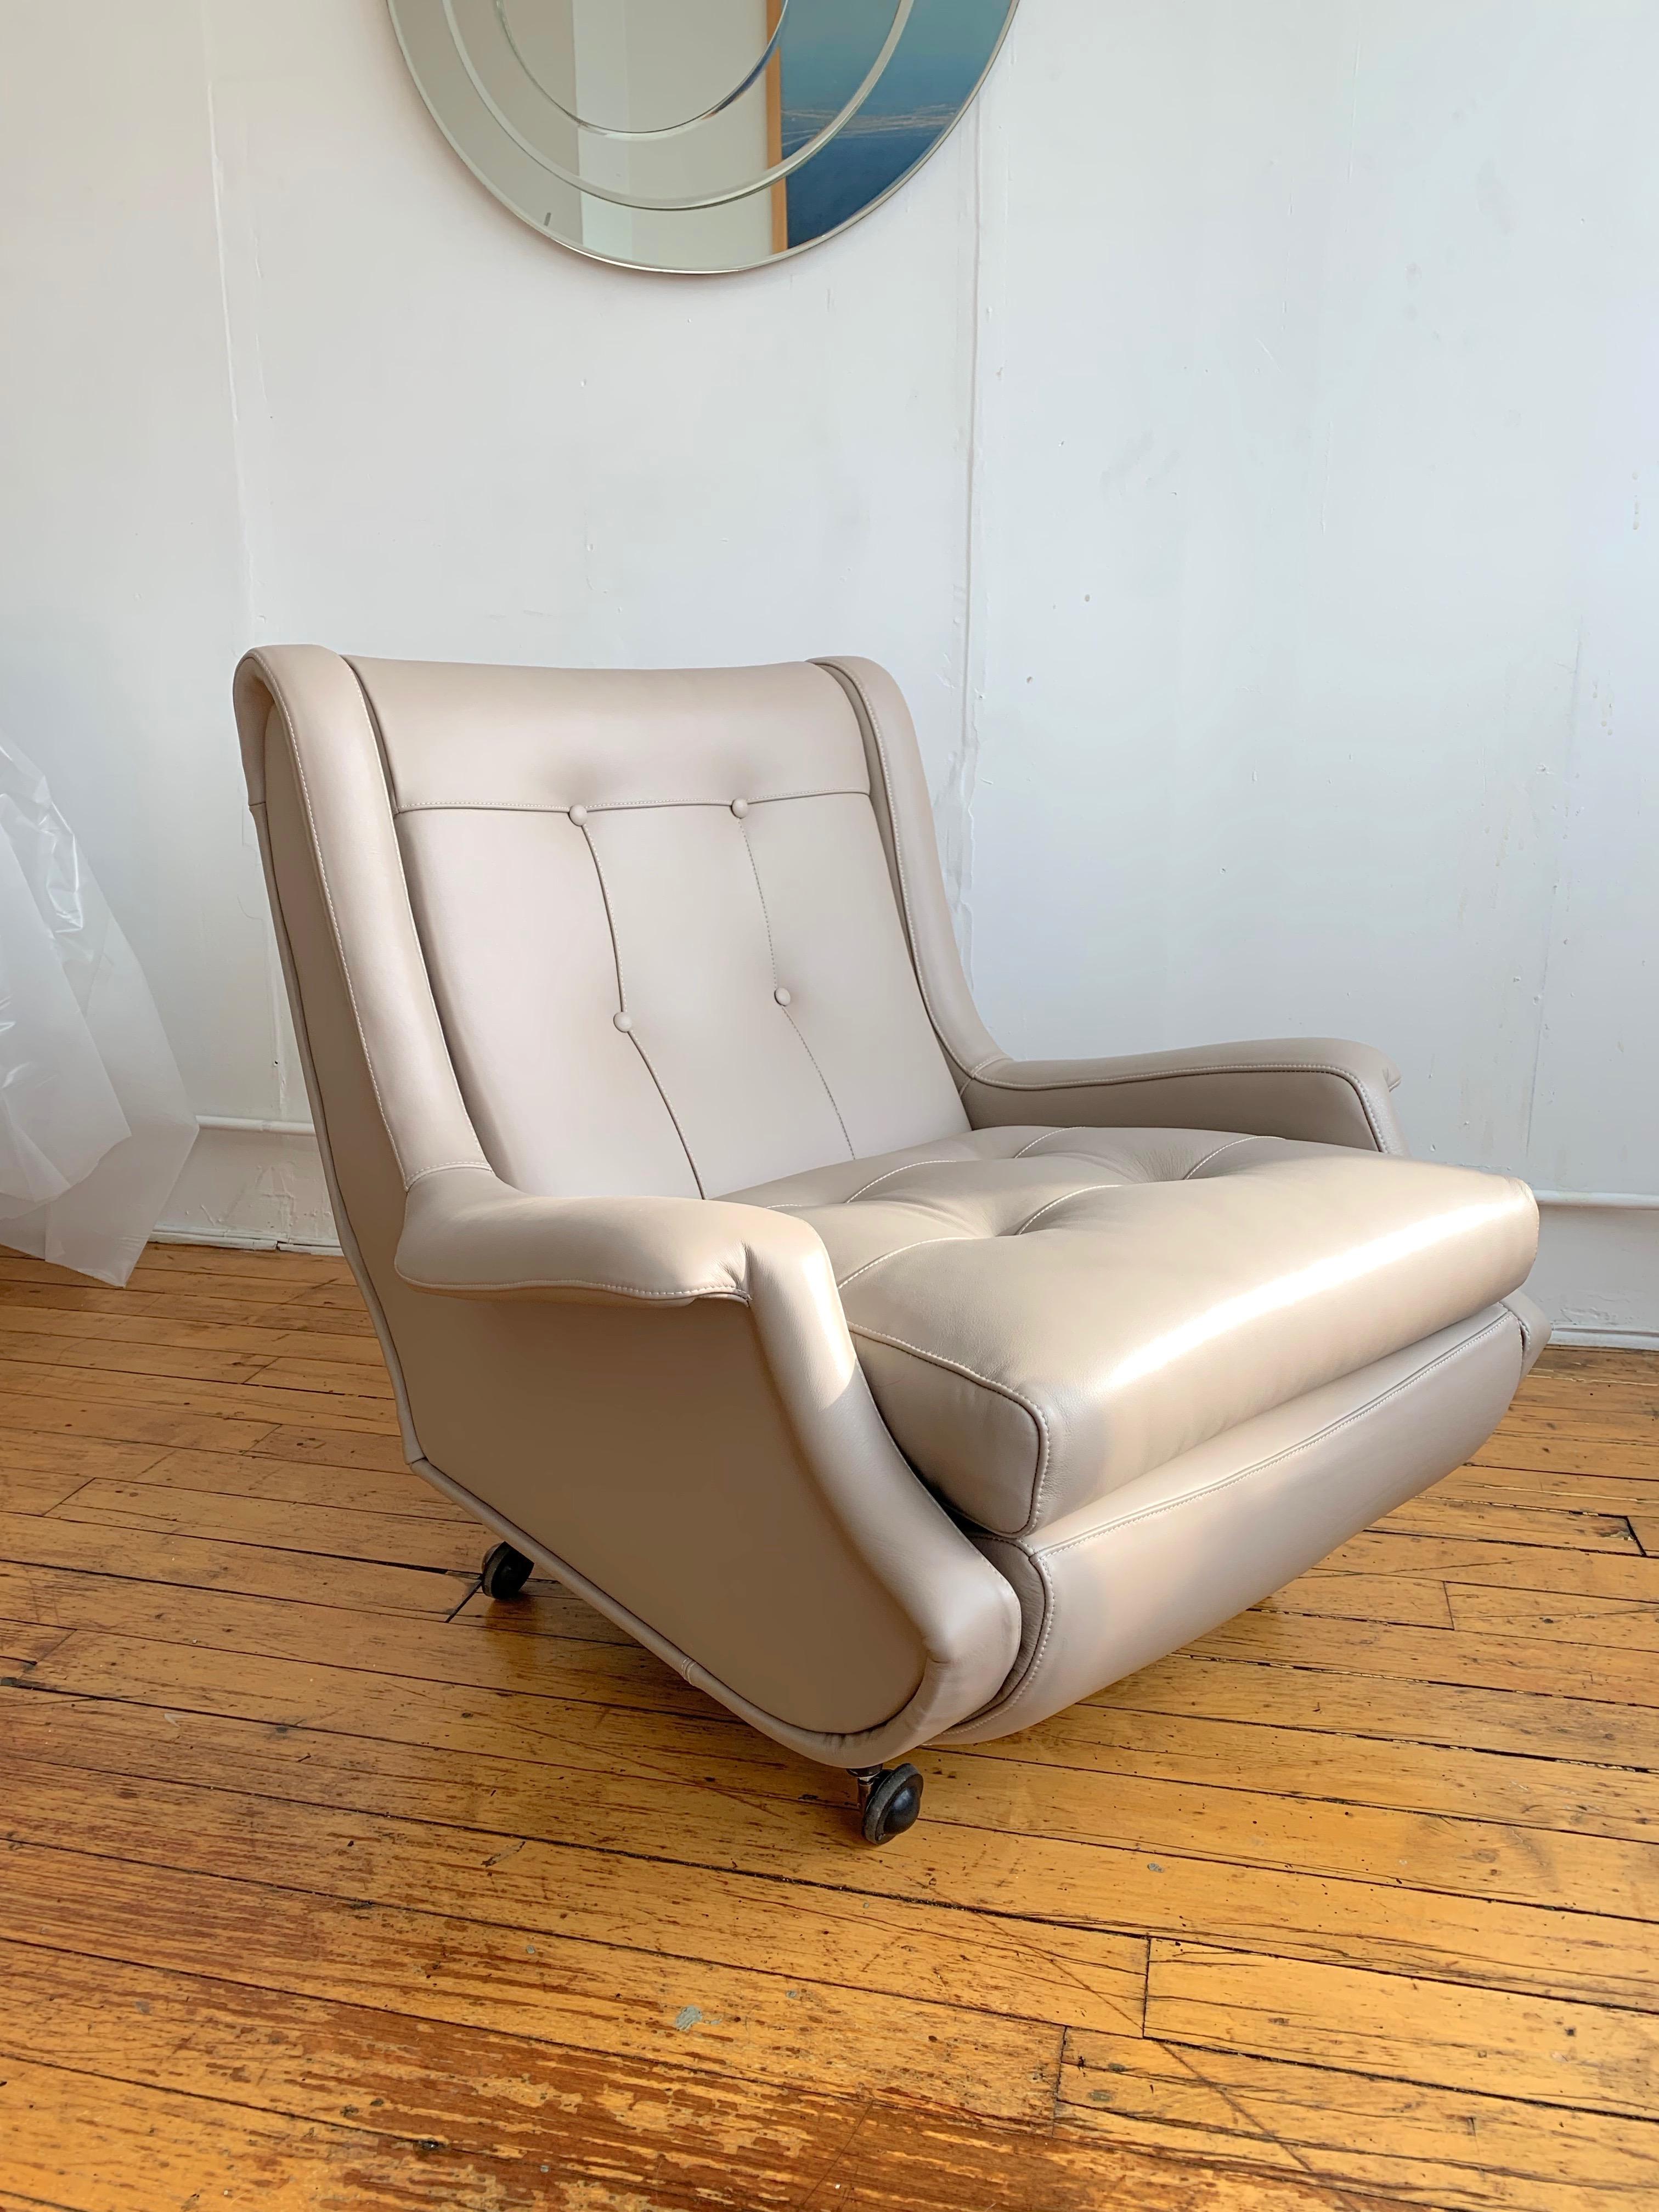 Marco Zanuso Regent Lounge Chair on castors, Arflex 1960s. The Regent lounge chair has been fully restored, reupholstered in a superior luxury Italian leather and features its original castors, which were produced only for a short period of time in